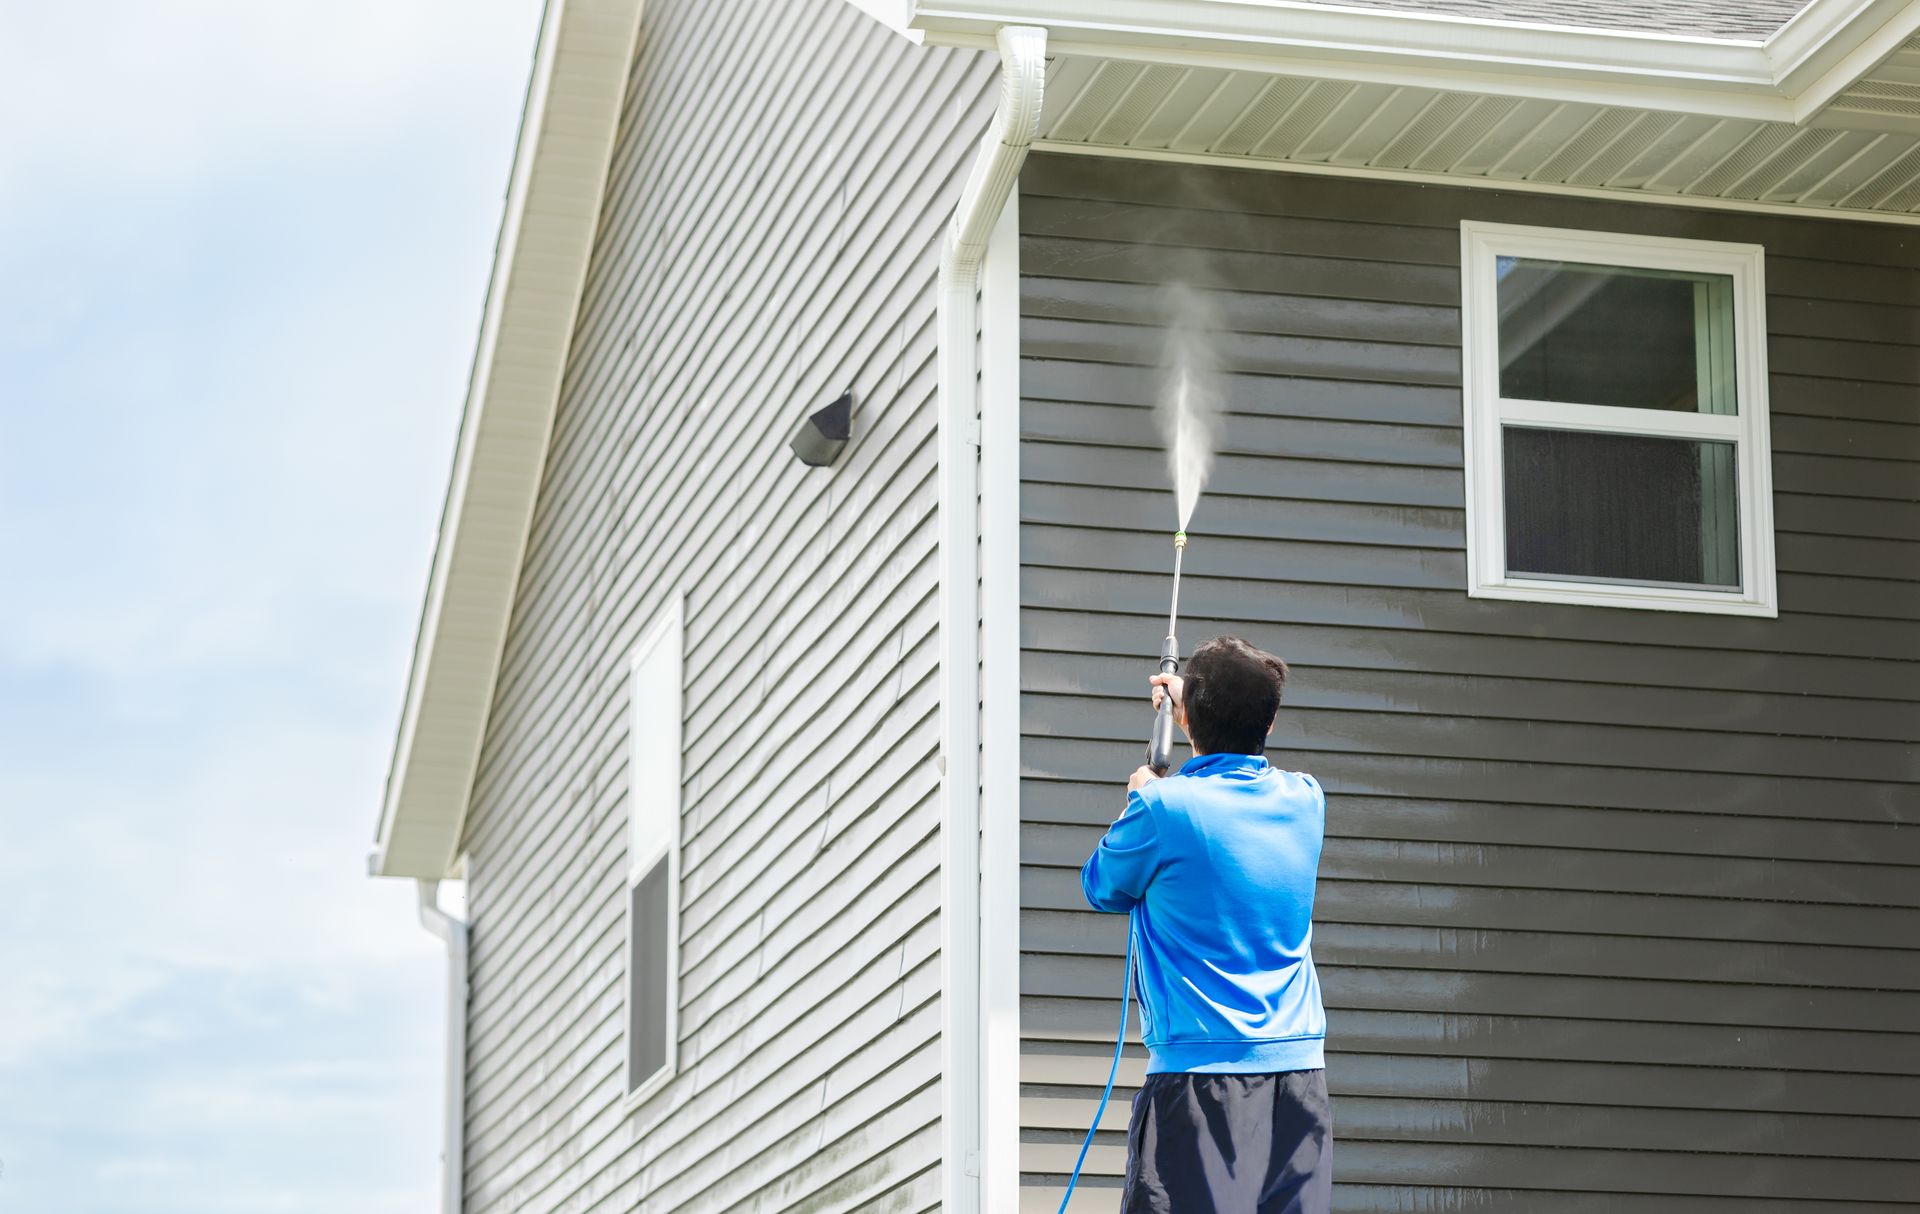 Man in blue jacket cleans dusk and dirt from exterior siding and under roof with a high-pressure nozzle spray with water soap cleaner